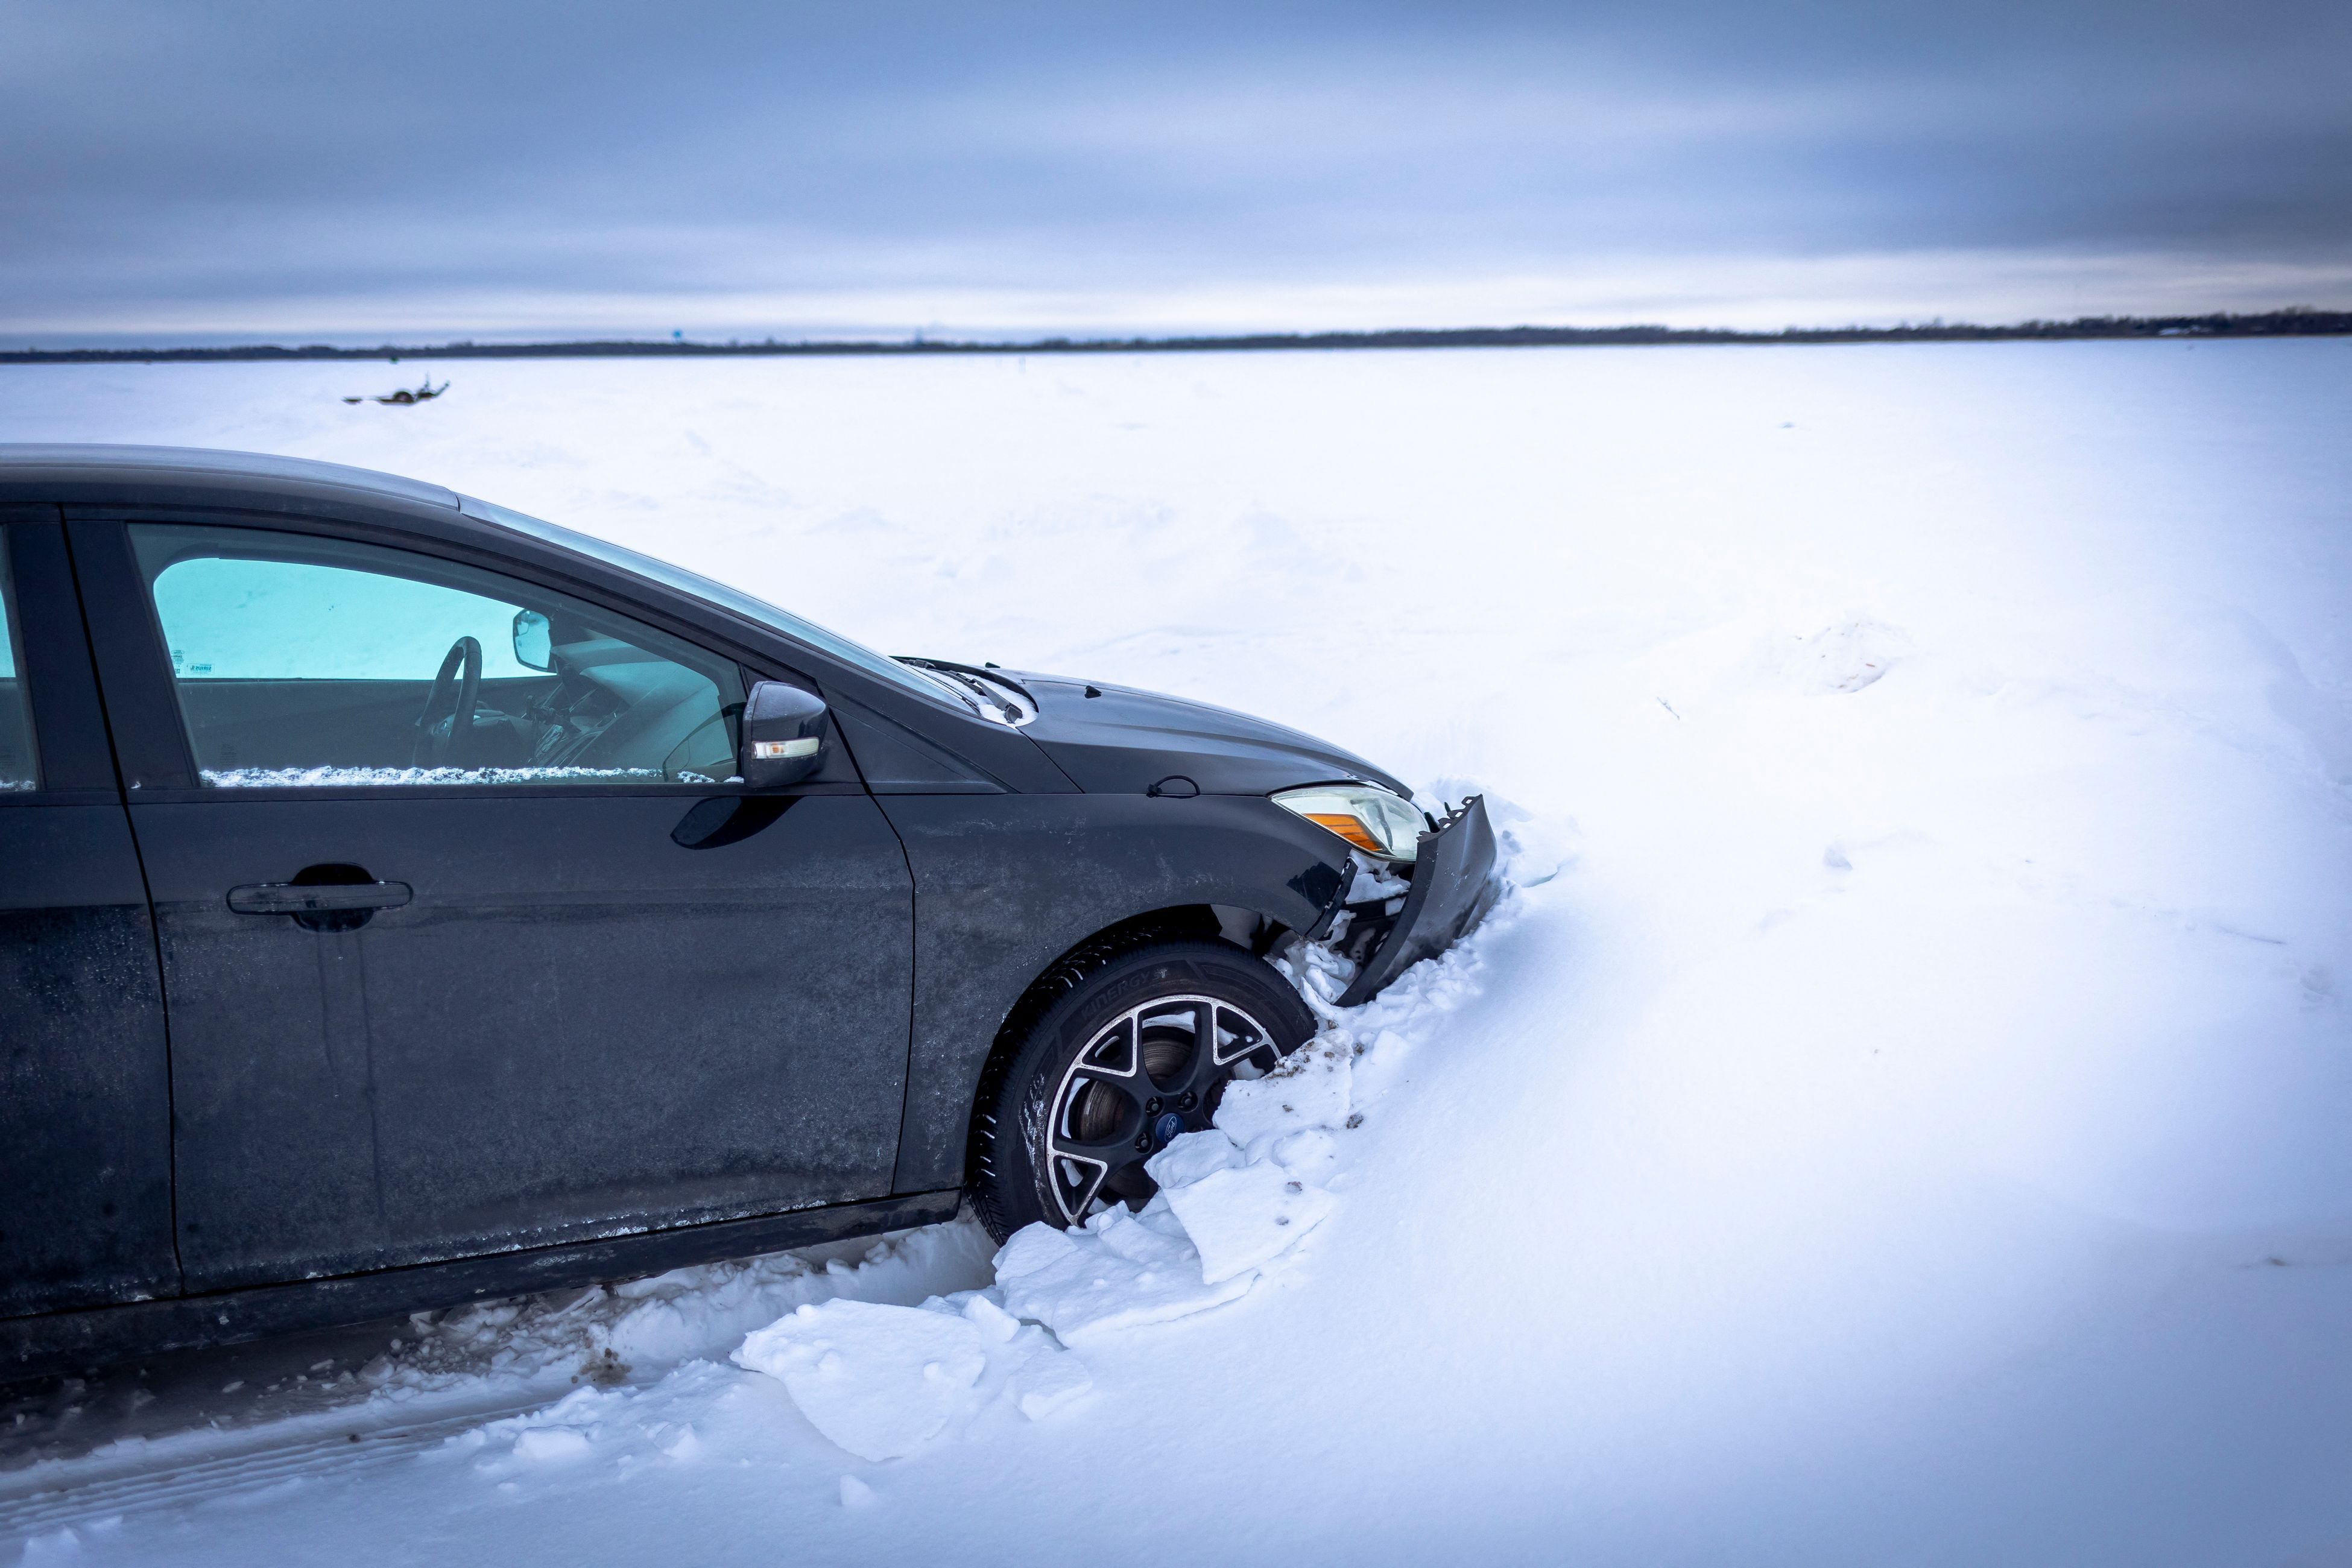  A vehicle crashed on the road closed by the storm, on the Northwest Angle ice road at Lake of the Woods between Warroad and Angle Inlet, Minnesota on January 17. 